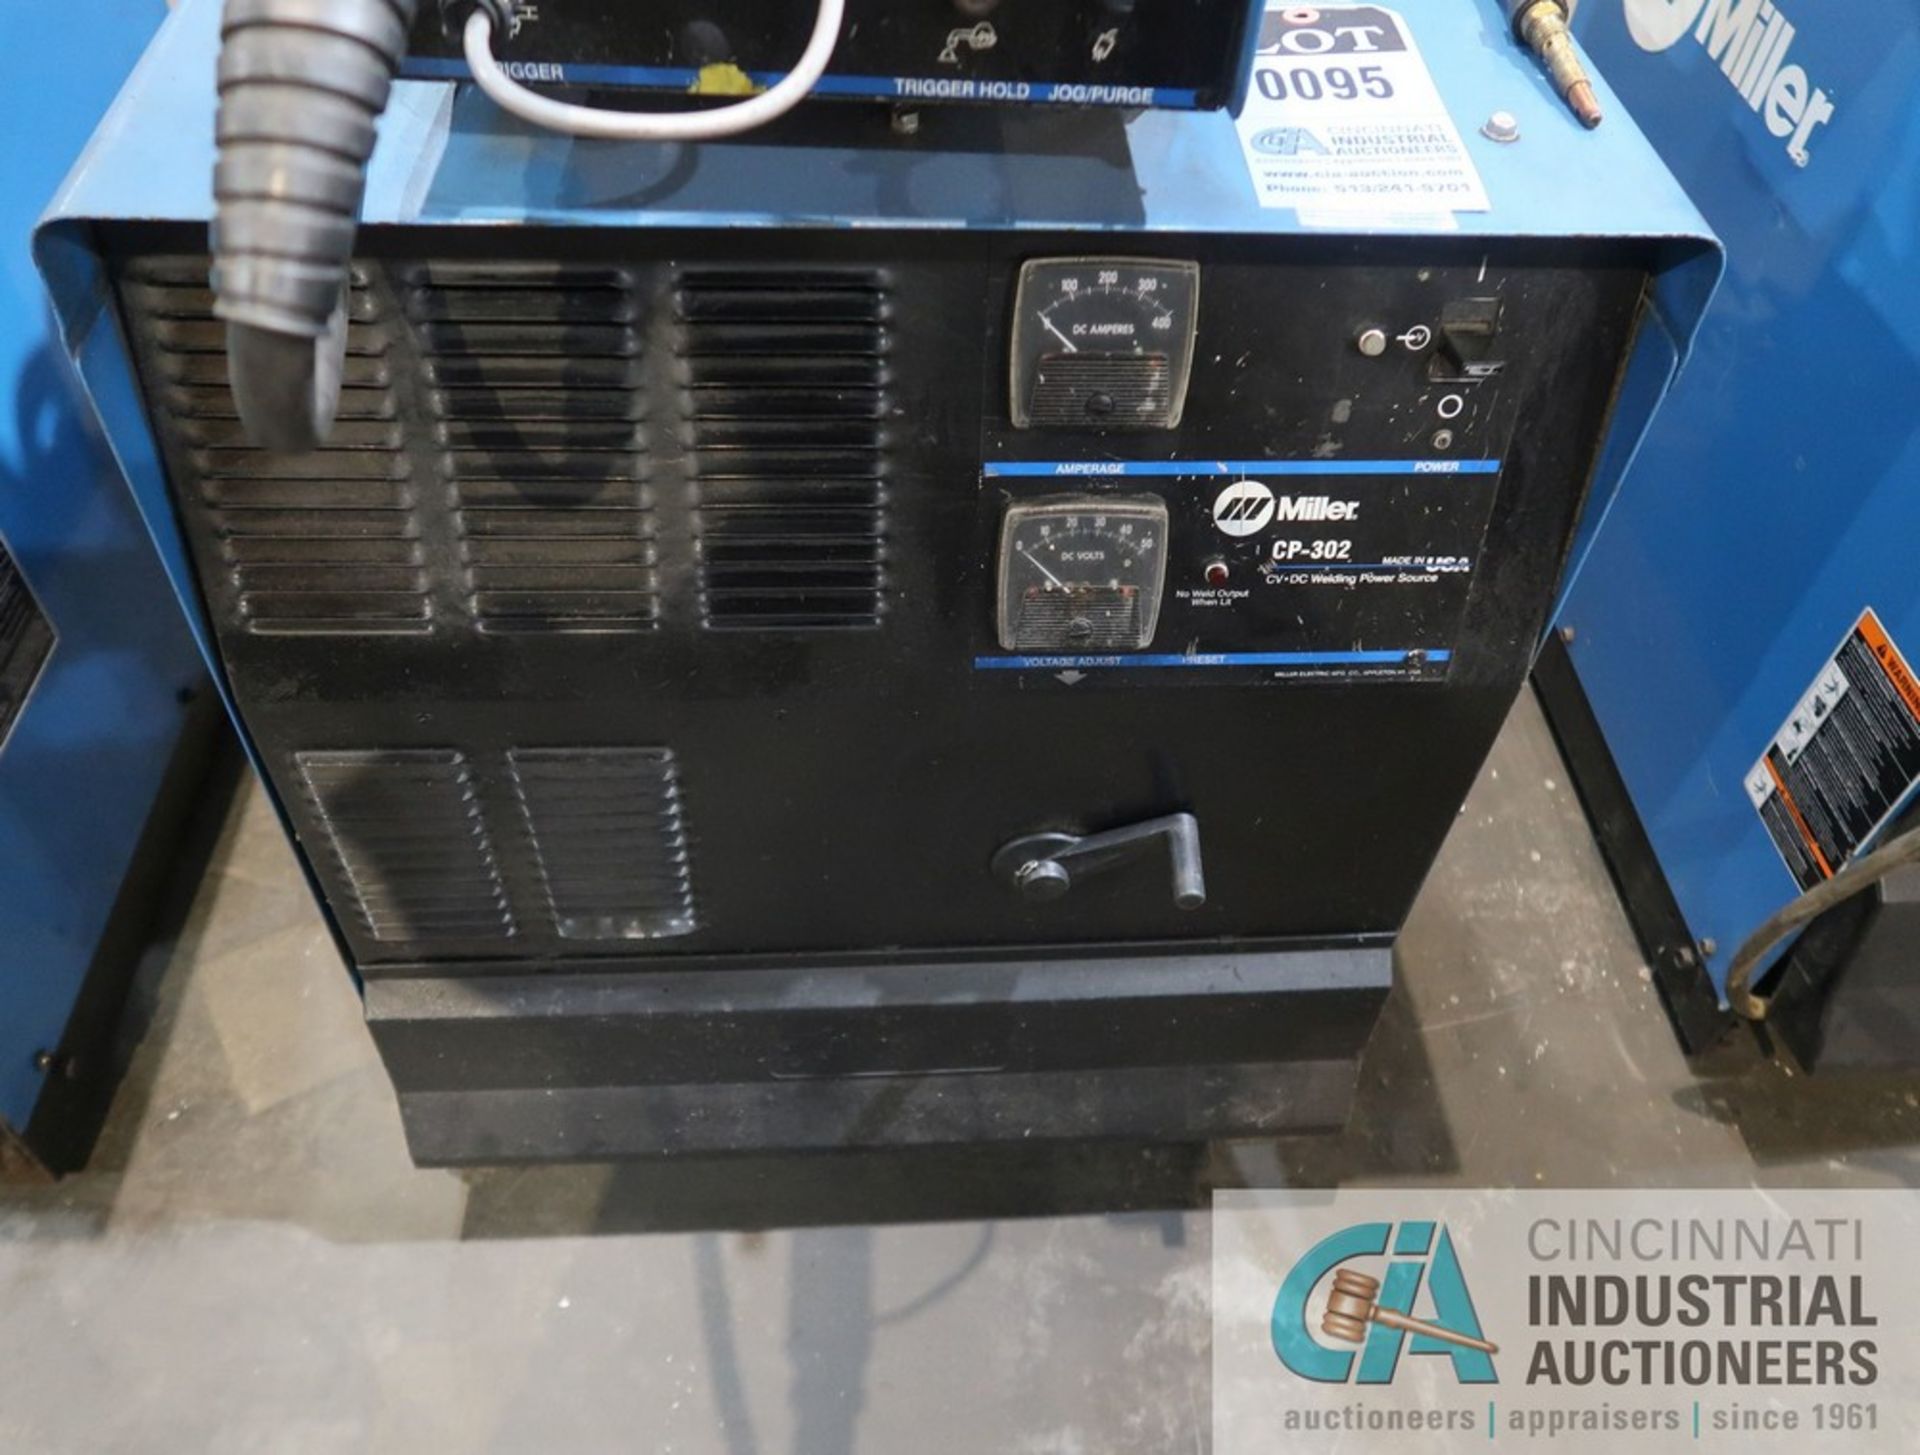 300 AMP MILLER CP-302 CV-DC WELDING POWER SOURCE; S/N LB330866, WITH MILLER 22A 24 VOLT WIRE FEEDER - Image 3 of 5